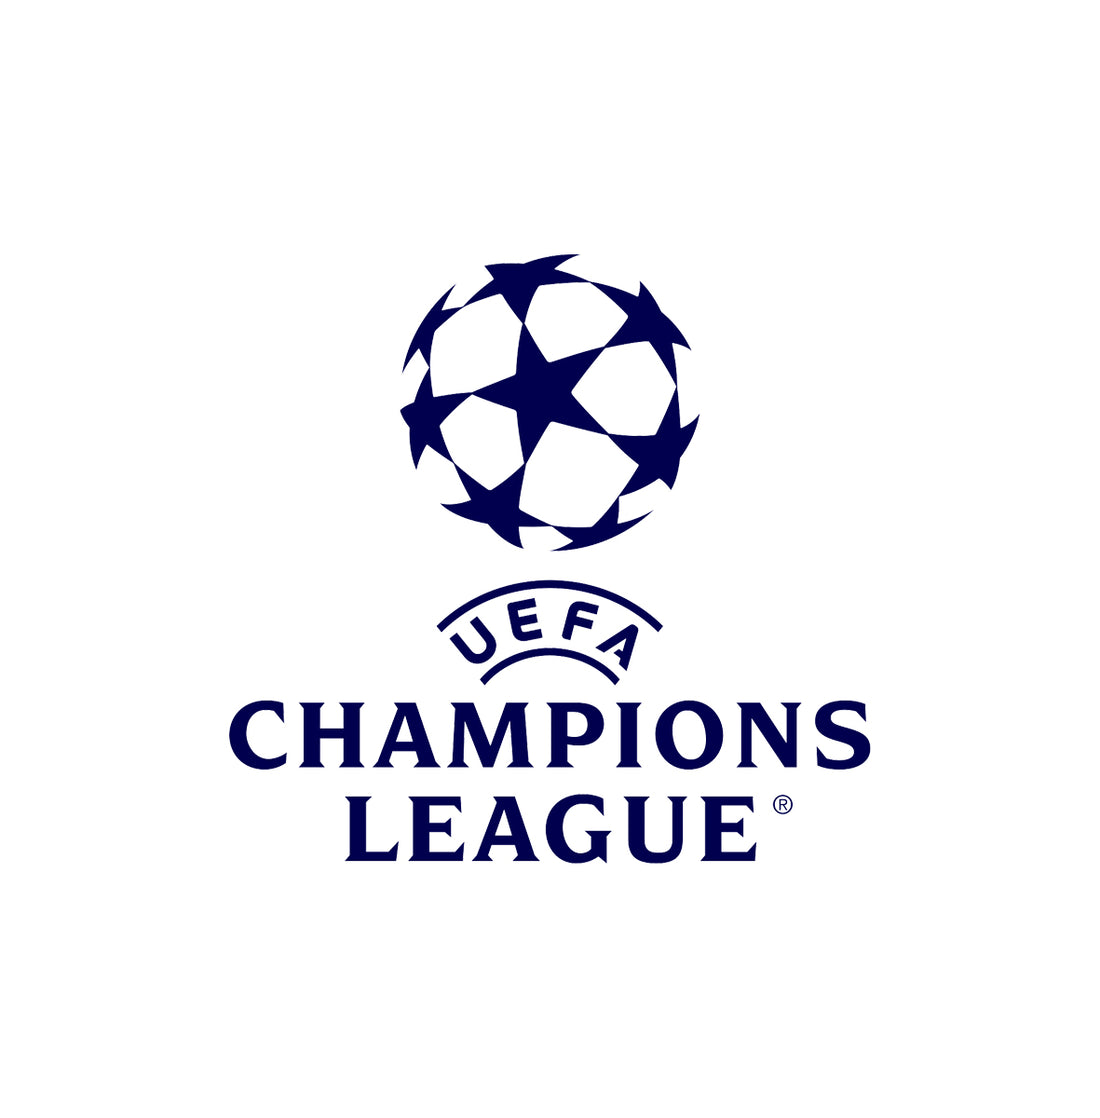  UEFA Champions League Collection